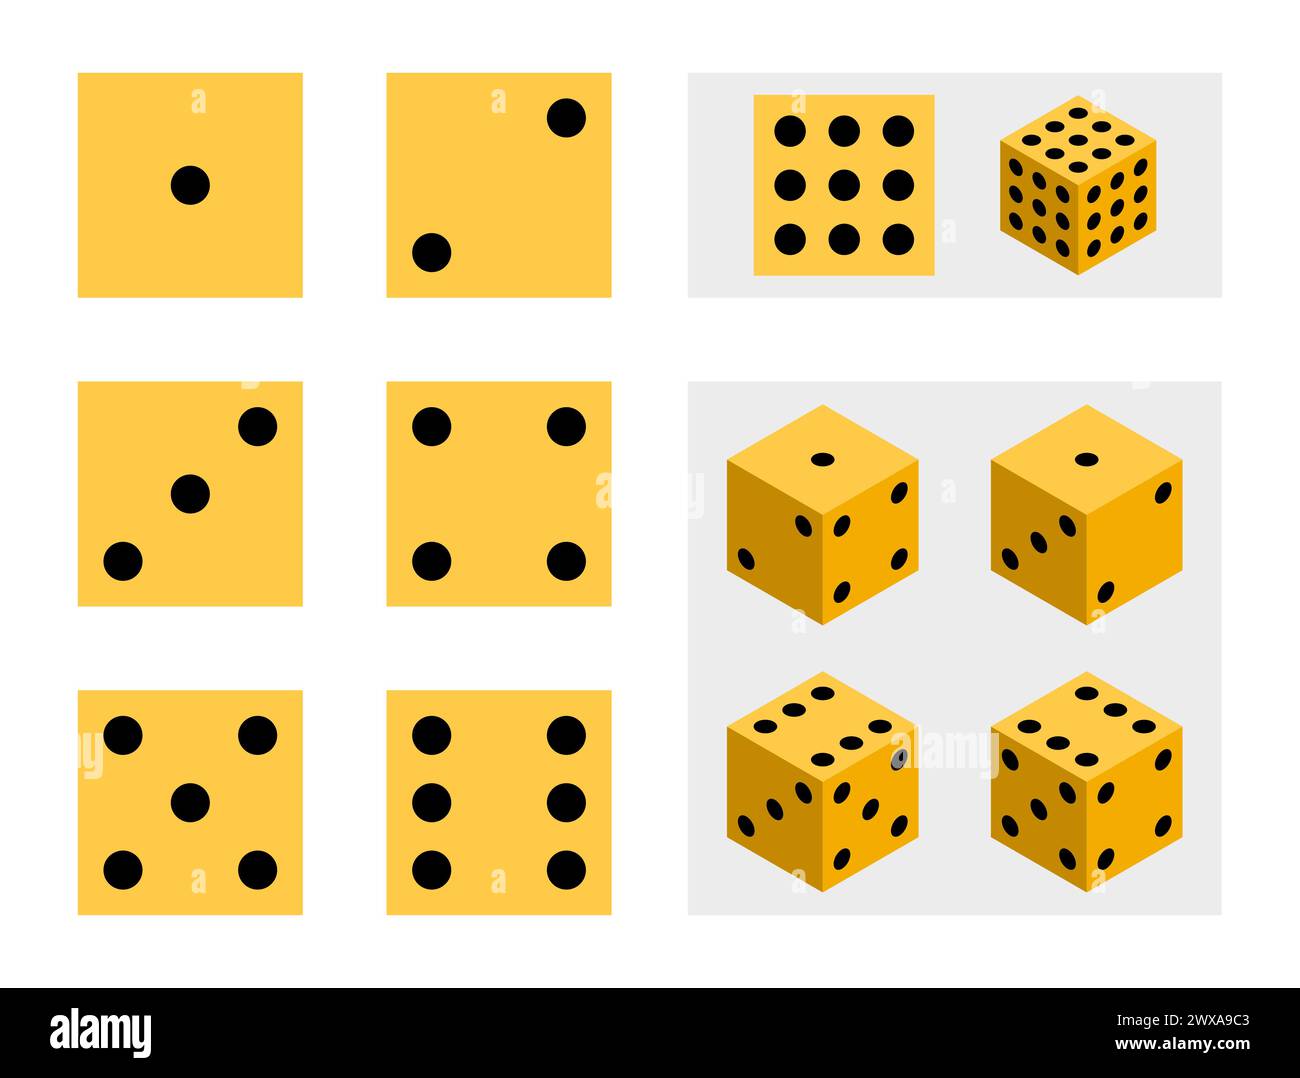 Dice faces and isometric template: games and gambling concept Stock Vector